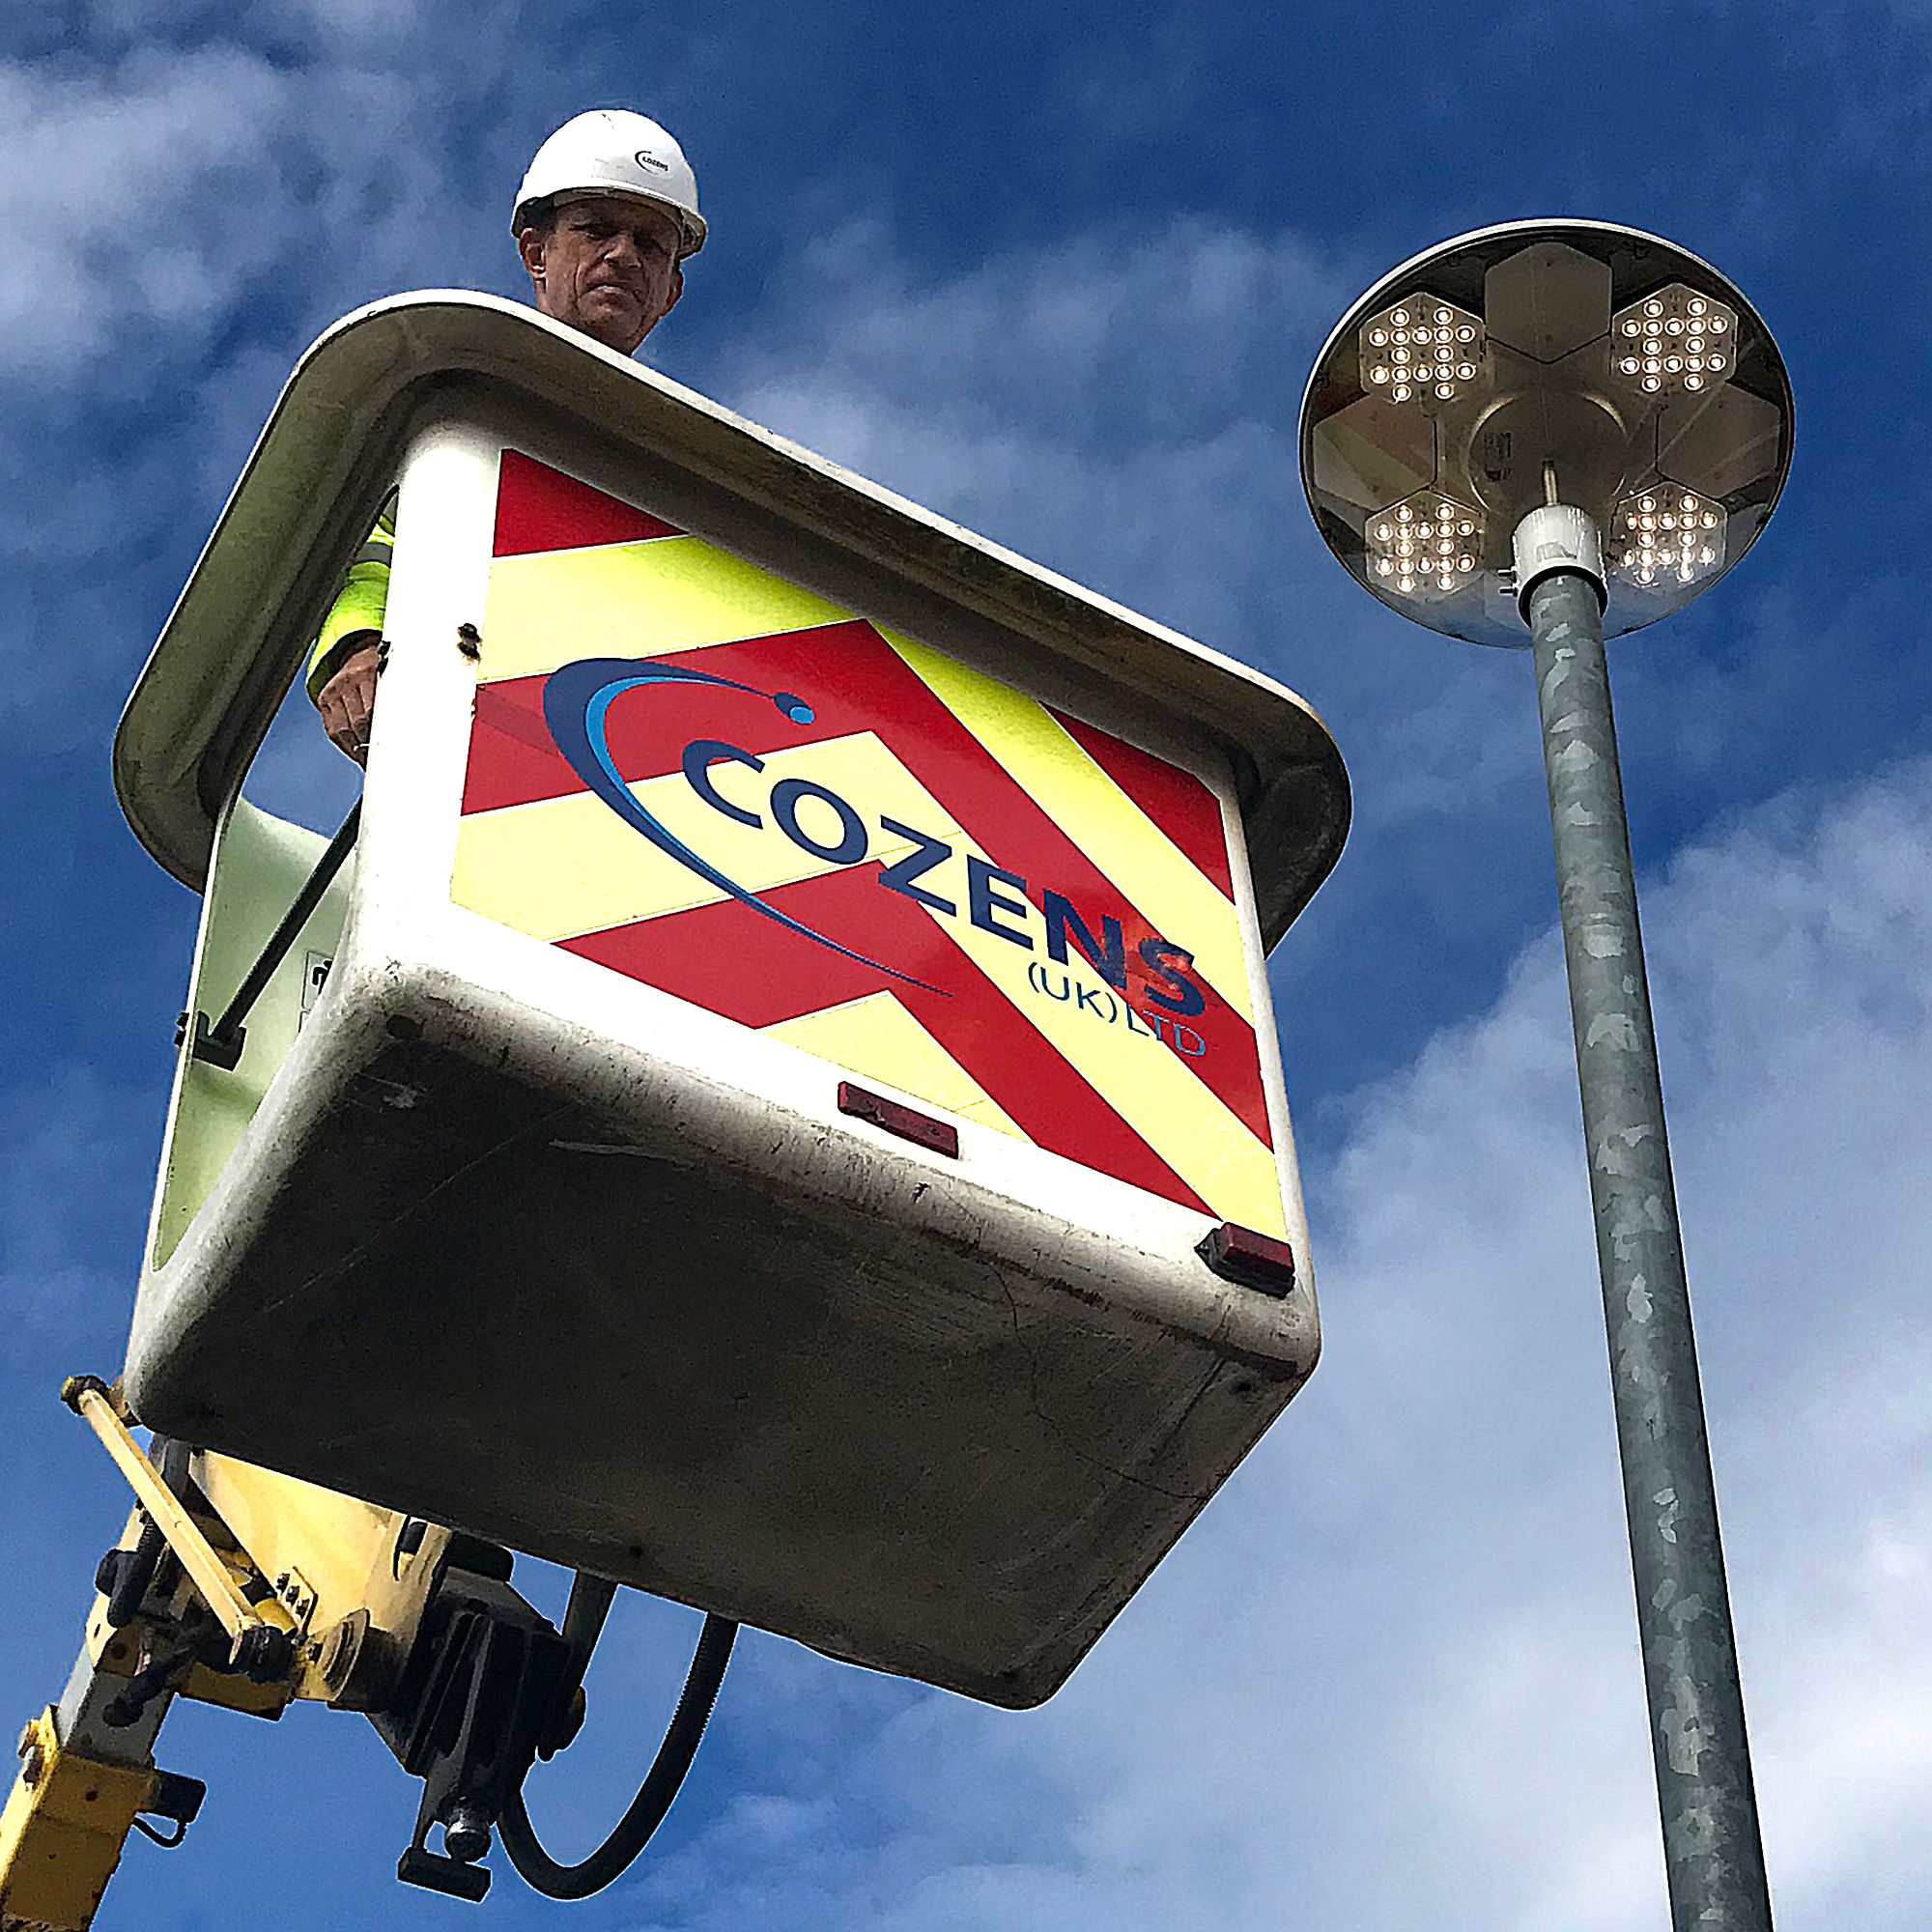 Cozens UK - LED Street Lighting Contactors and Electrical Services